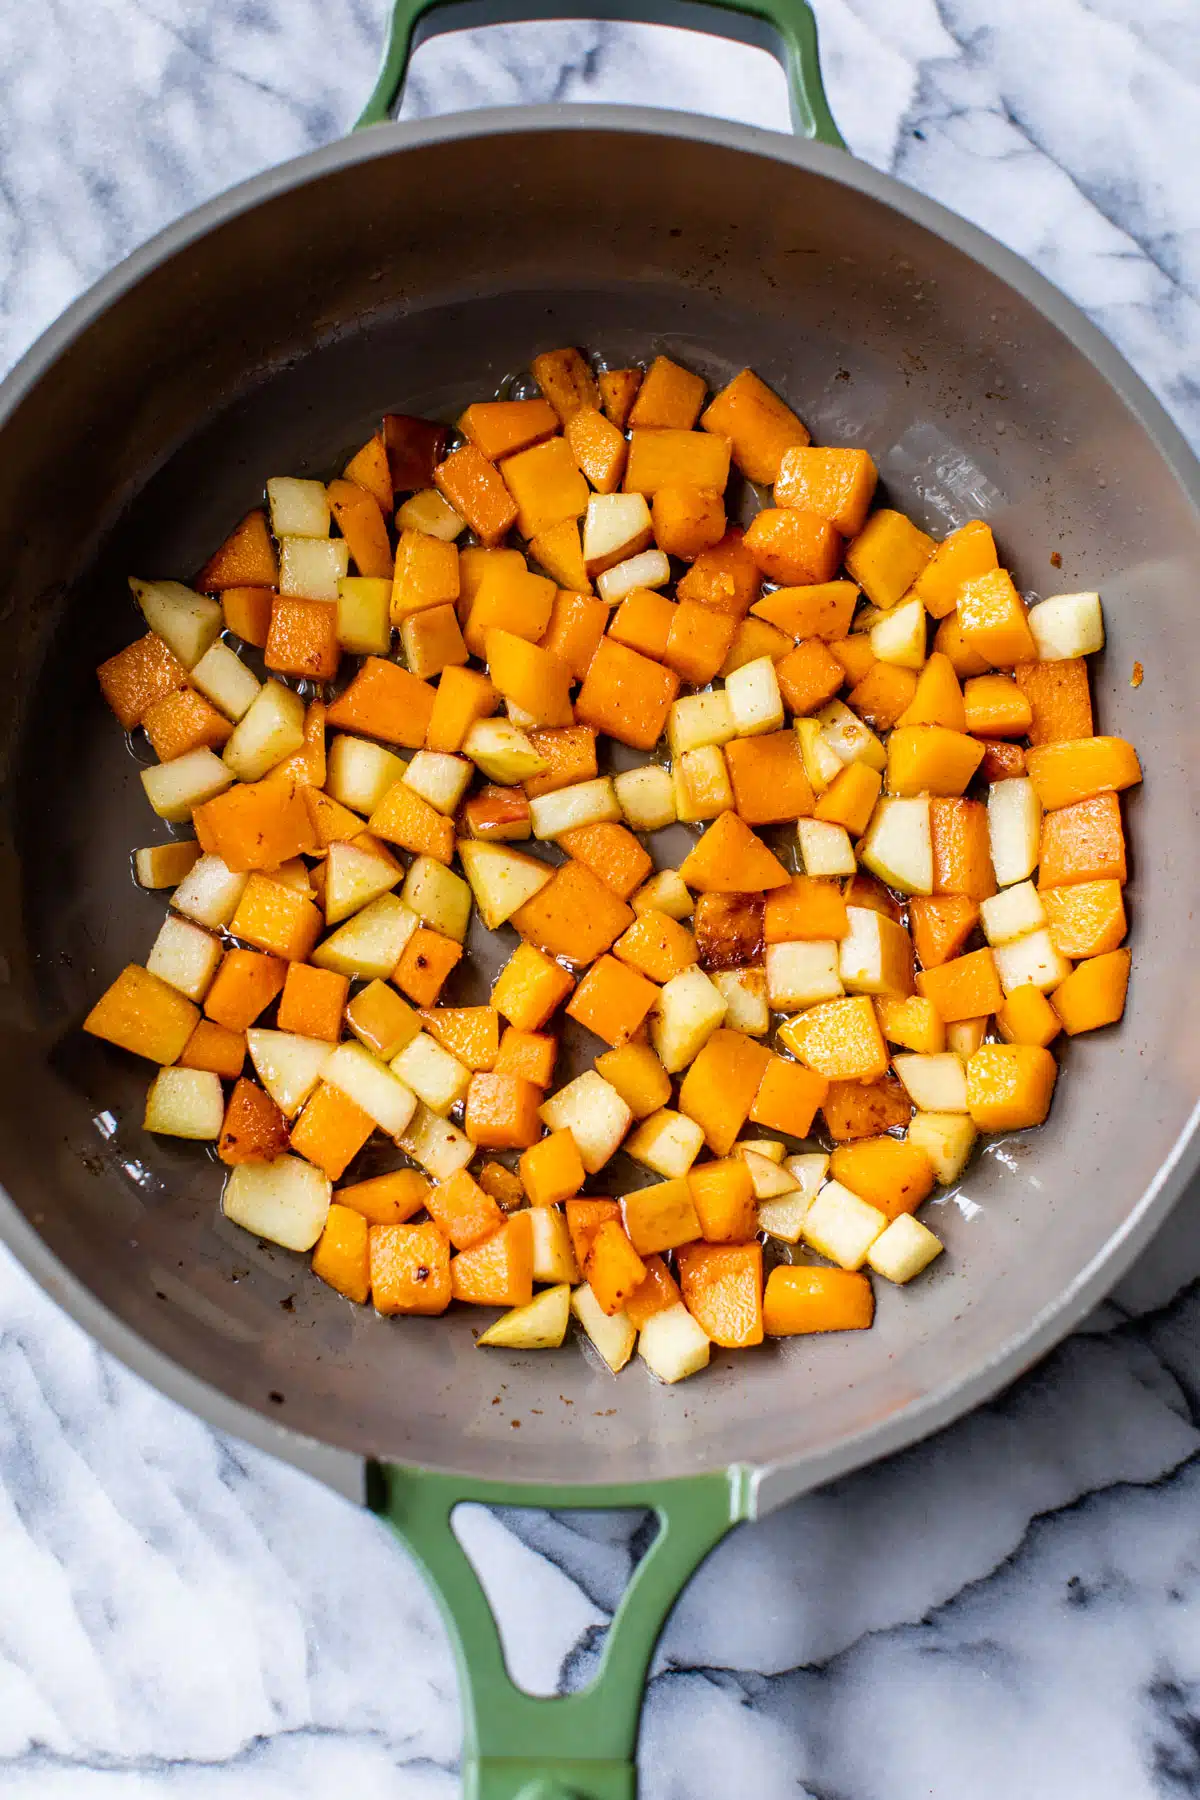 butternut squash pieces cooking in a skillet